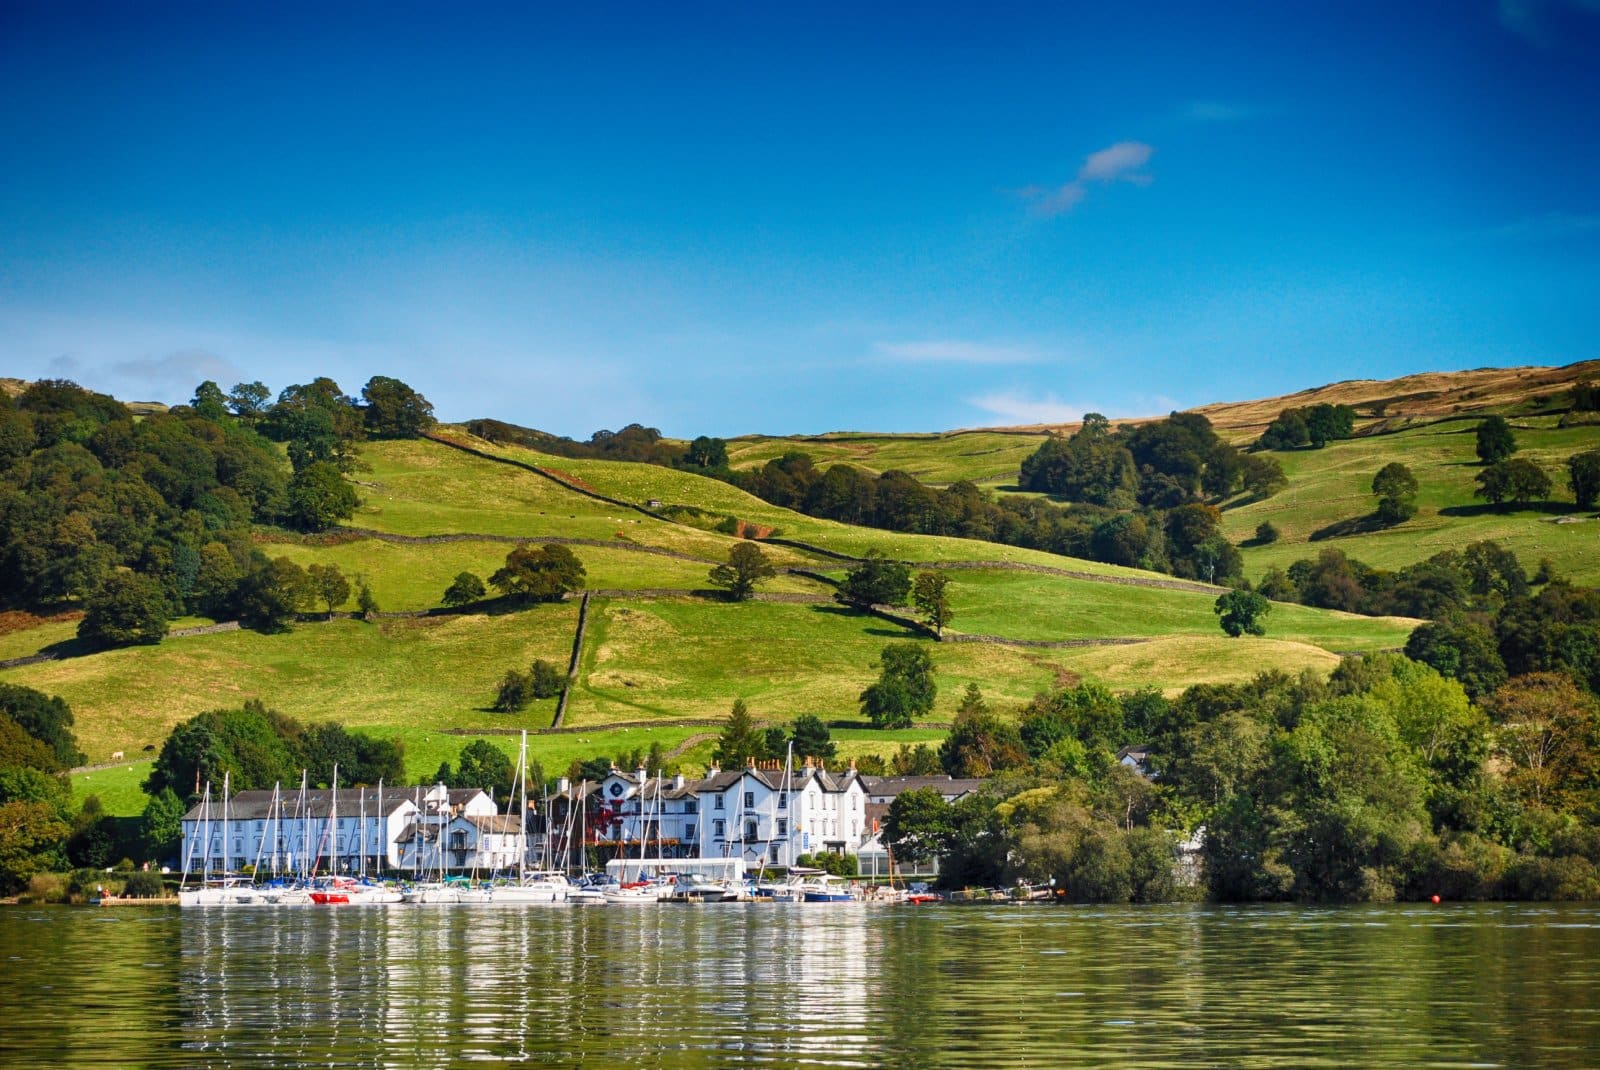 Image Credit: Shutterstock / Mr Nai <p>Cumbria, with its legendary Lake District, proves that water attracts more water. Visitors here quickly learn that there’s no such thing as bad weather, just inappropriate clothing choices.</p>